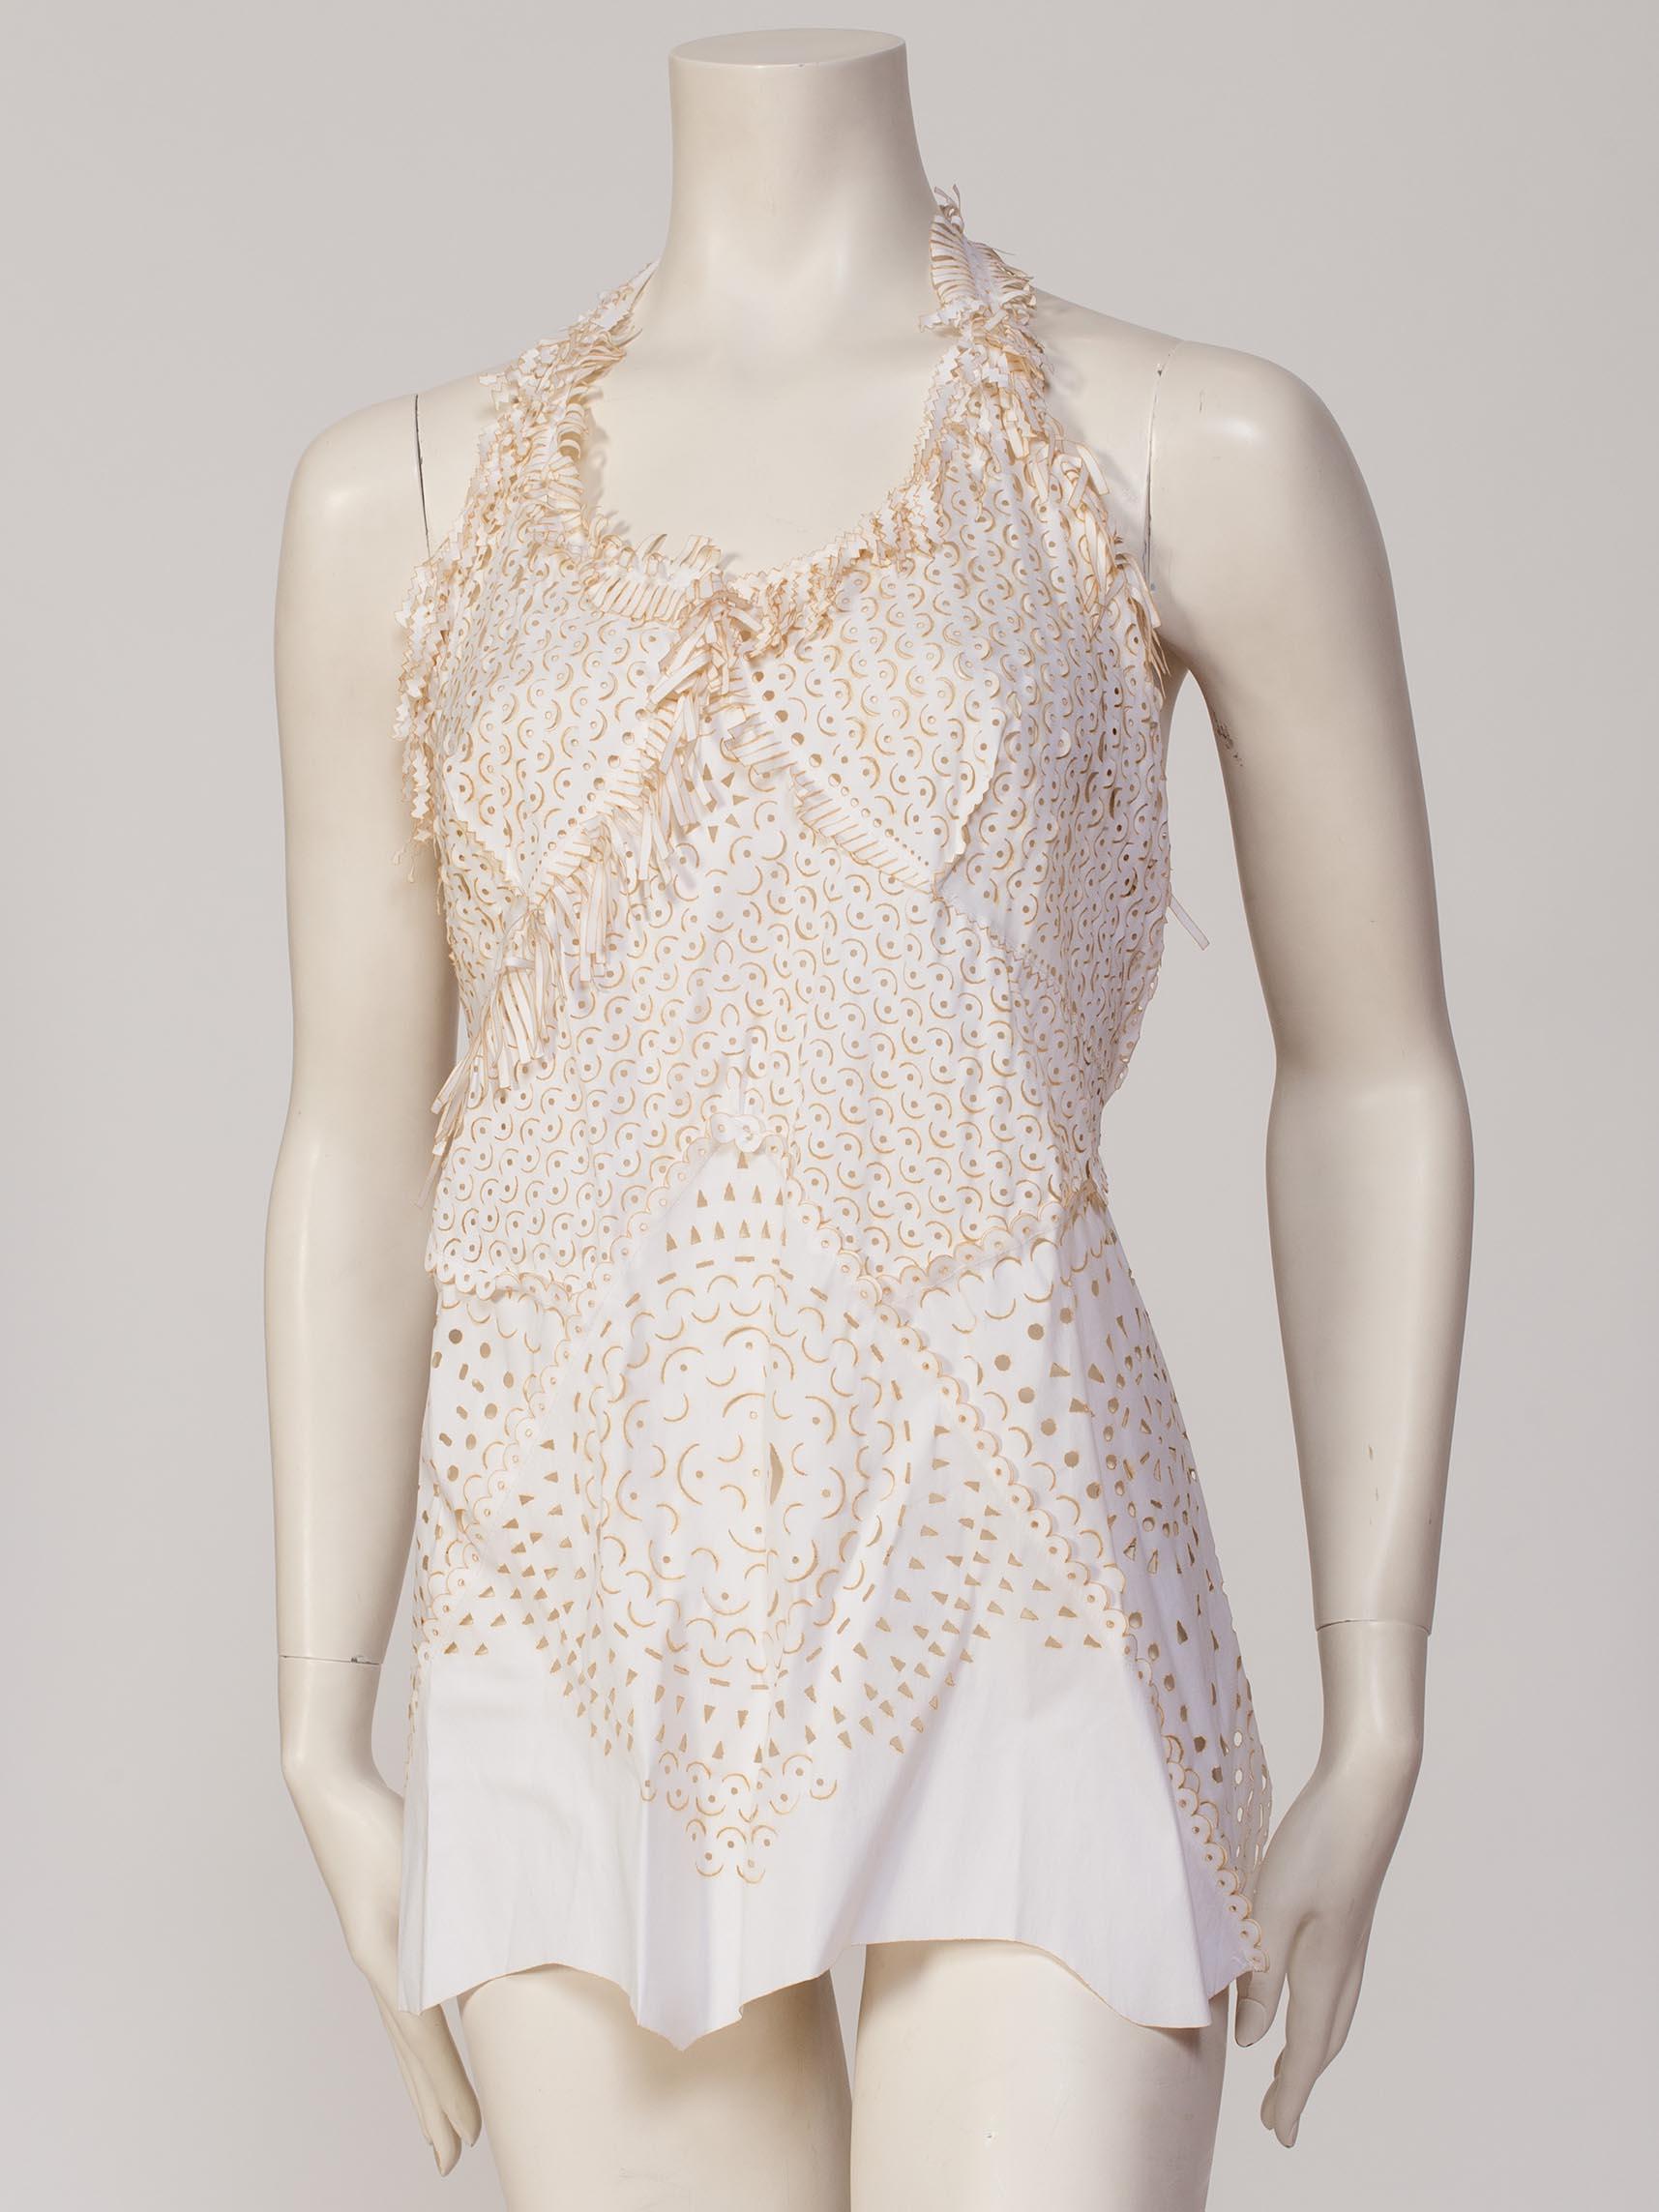 1990S JEAN PAUL GAULTIER Cotton Blend Laser Cut Eyelet Top In Excellent Condition For Sale In New York, NY